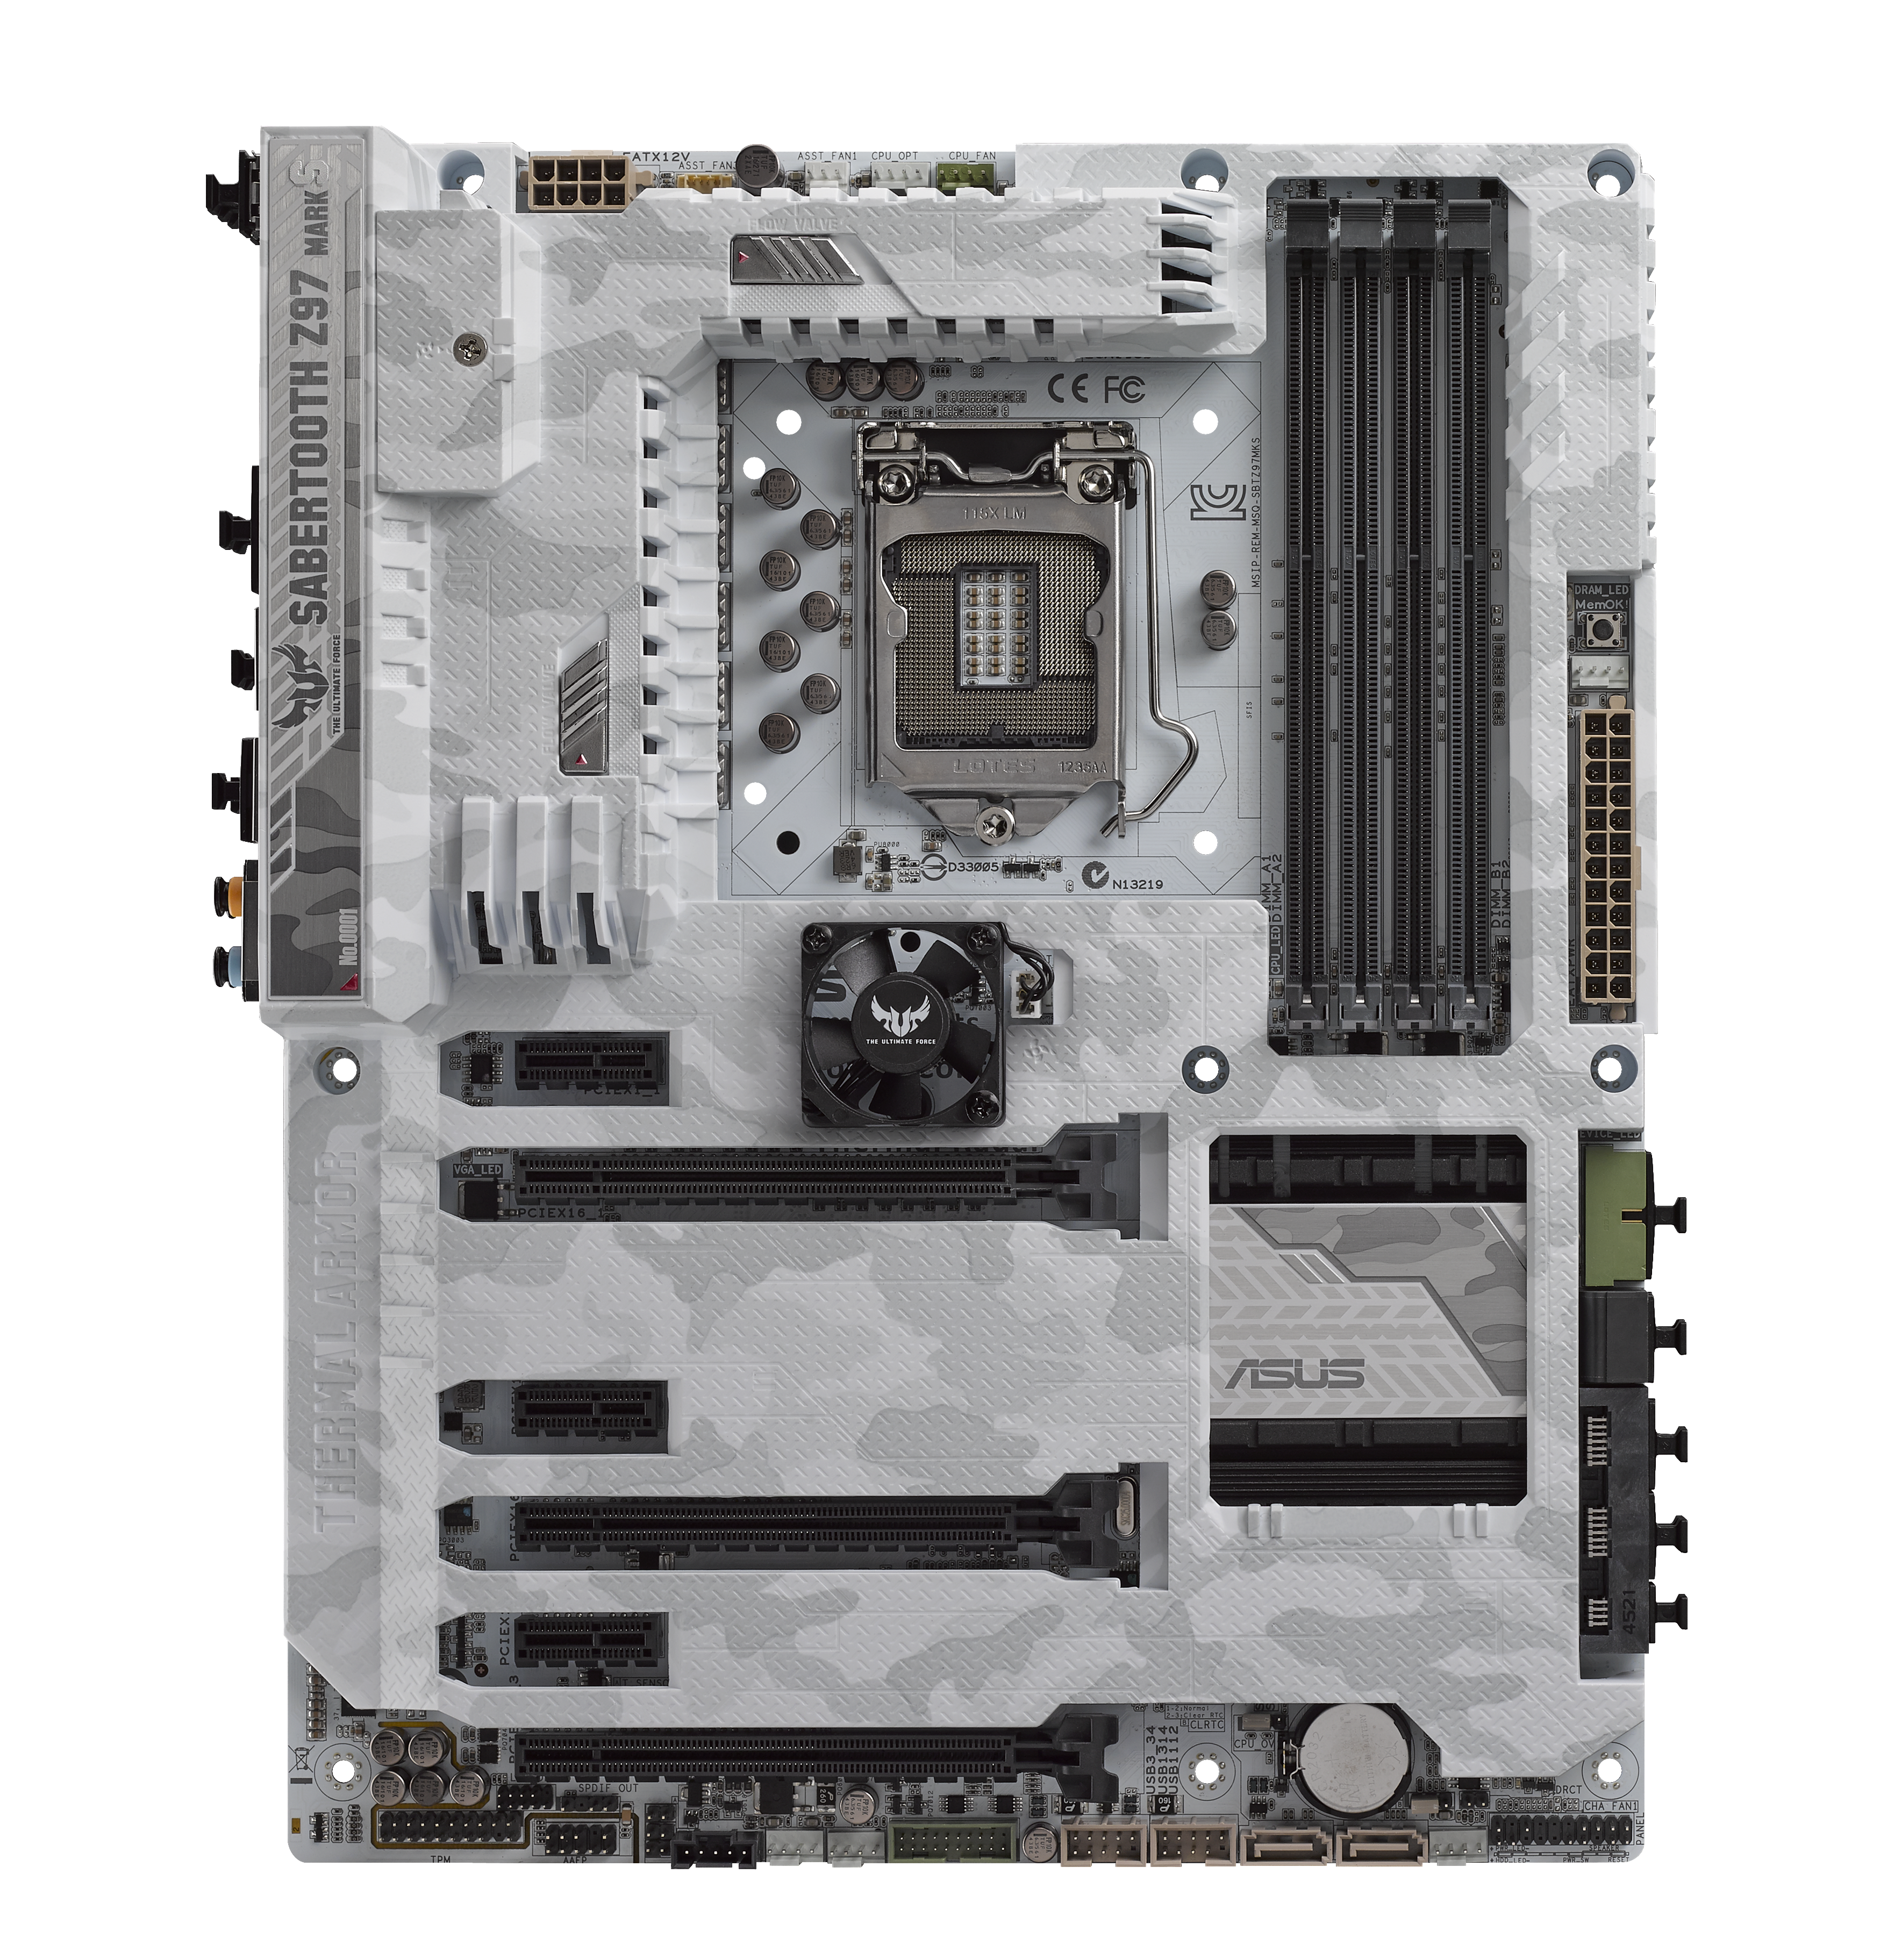 ASUS TUF Z97 Mark S Motherboard Review: The Arctic Camo Special